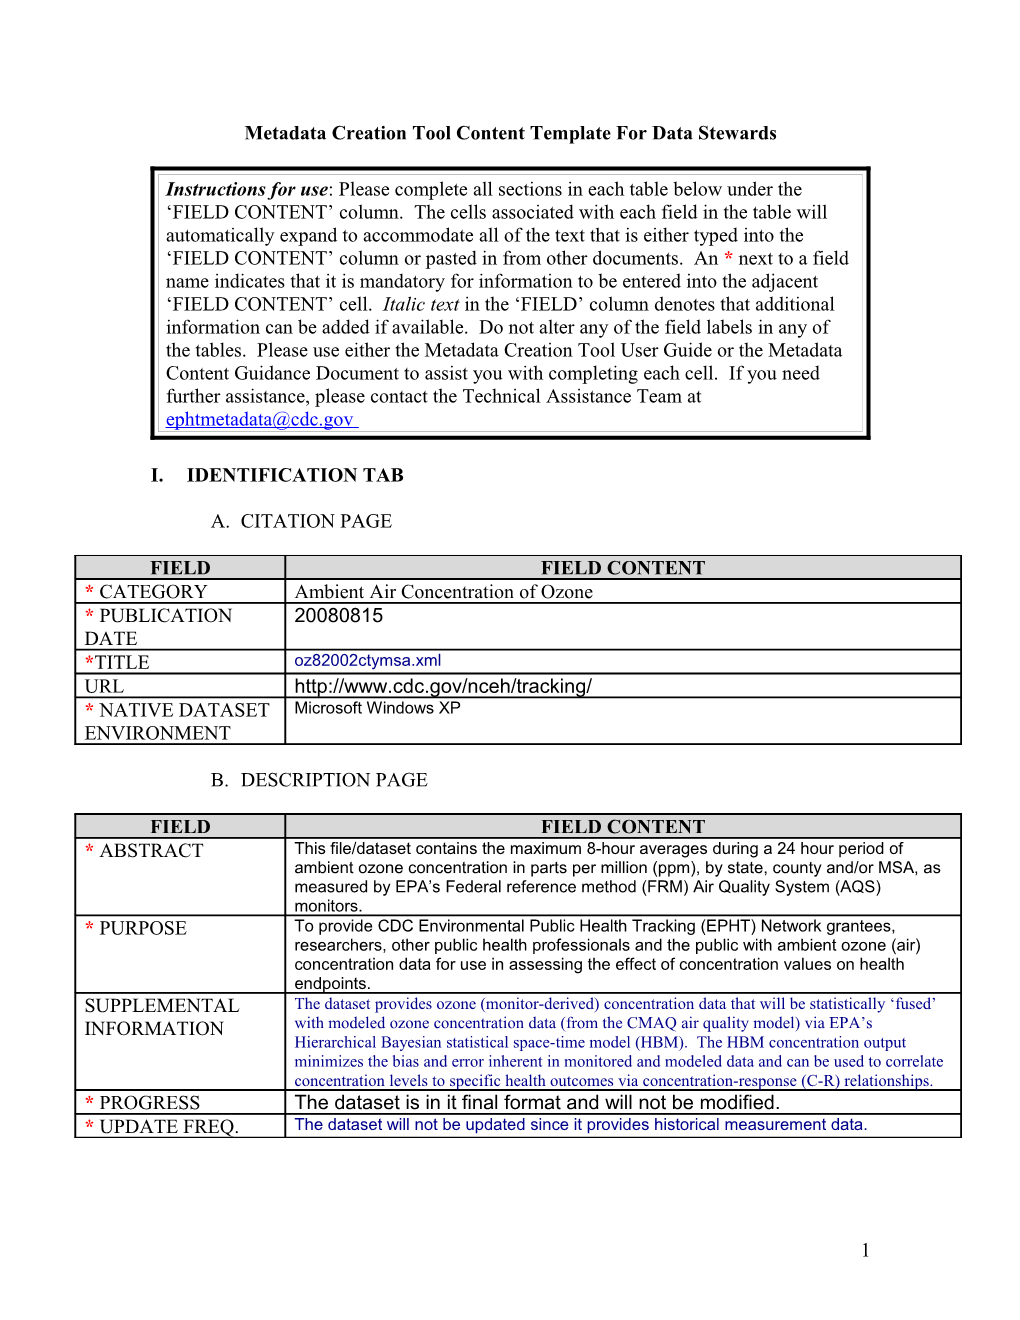 Metadata Creation Tool Content Template for Data Stewards